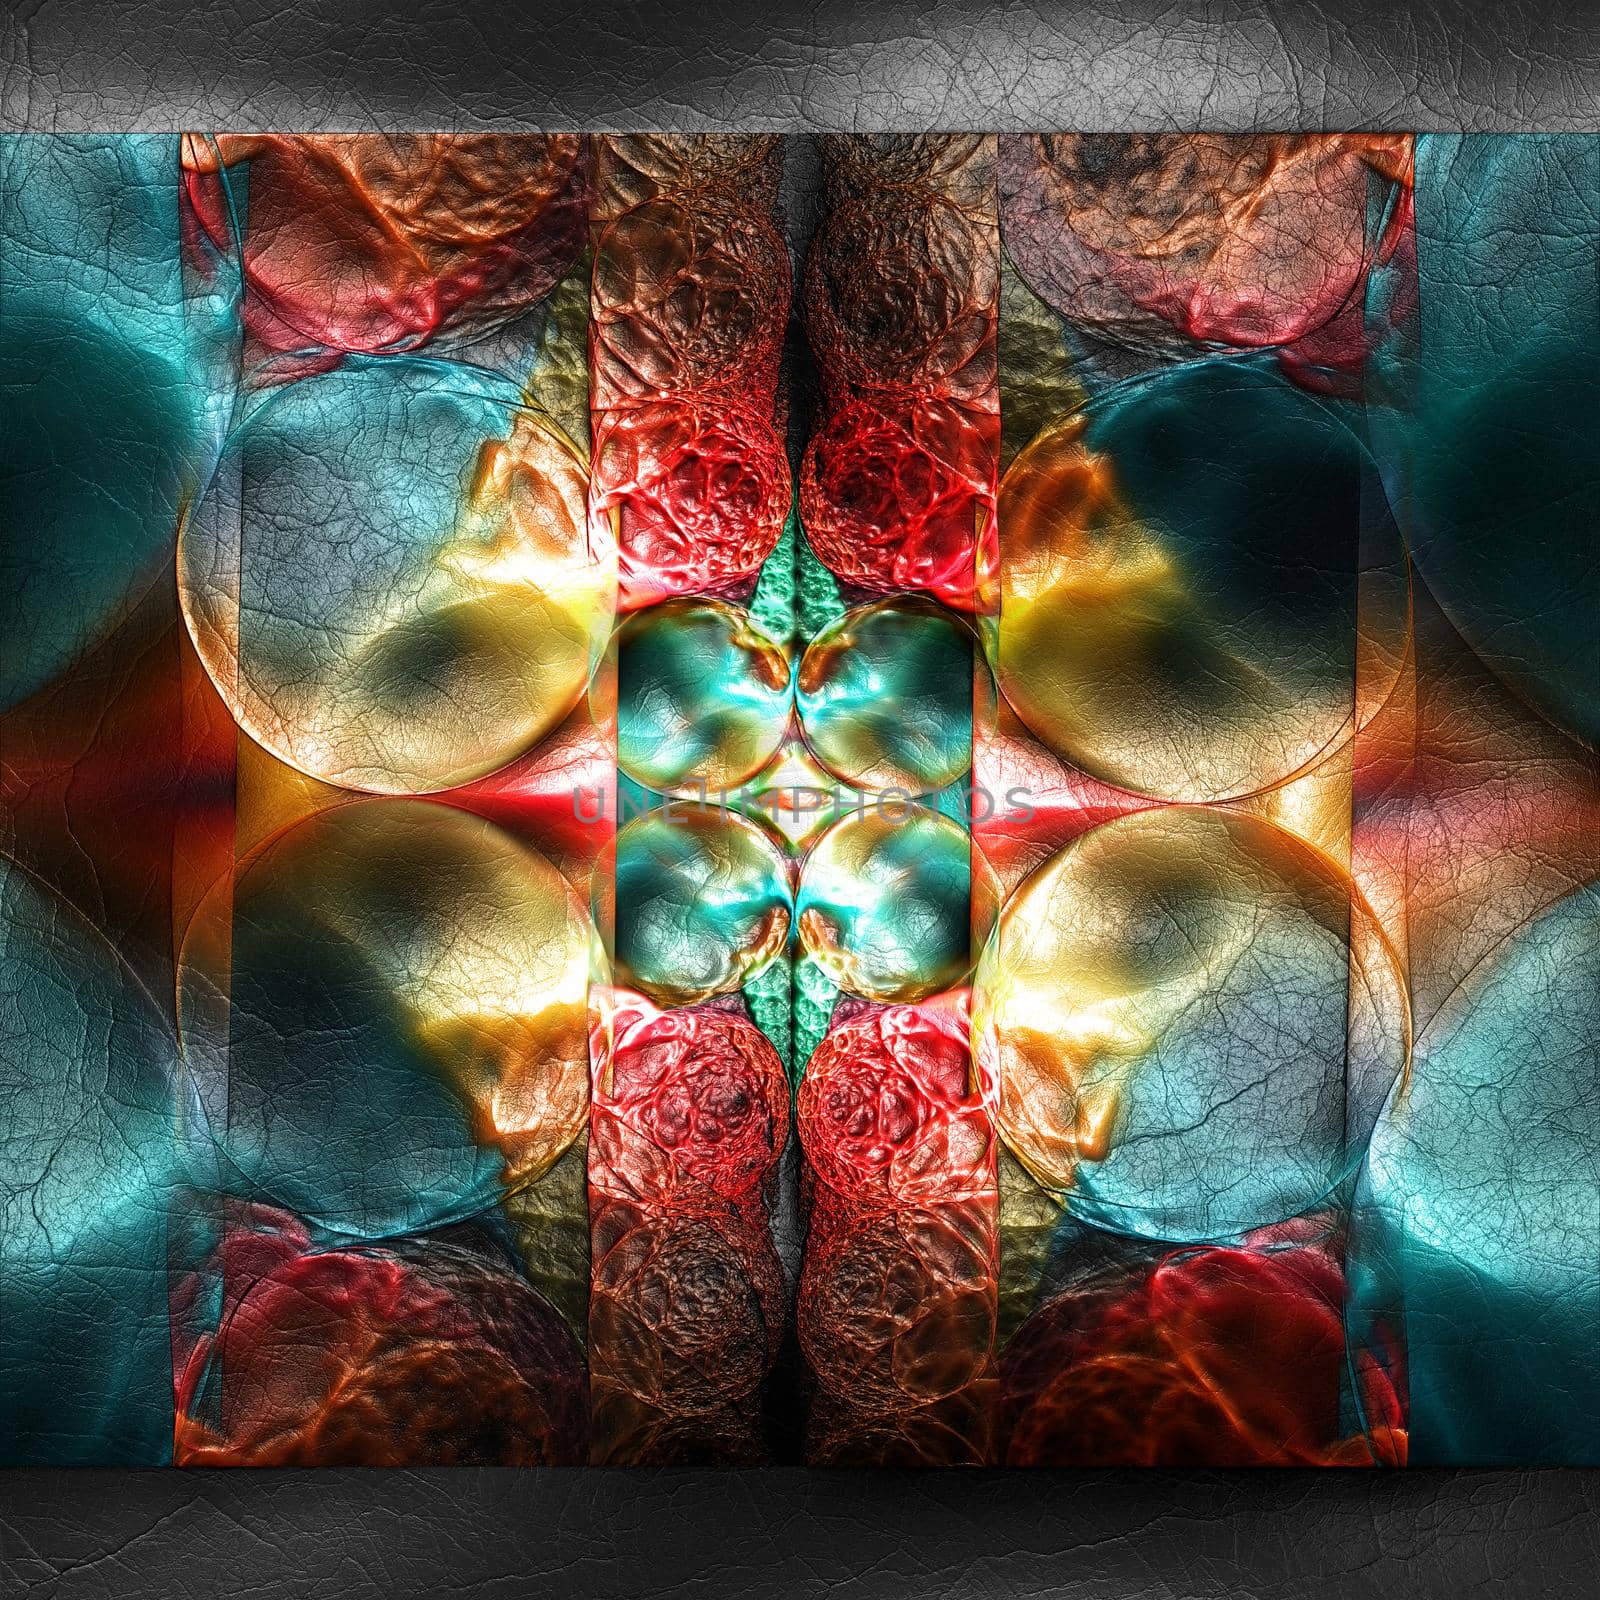 3D rendering of plastic fractal on leather by stocklady